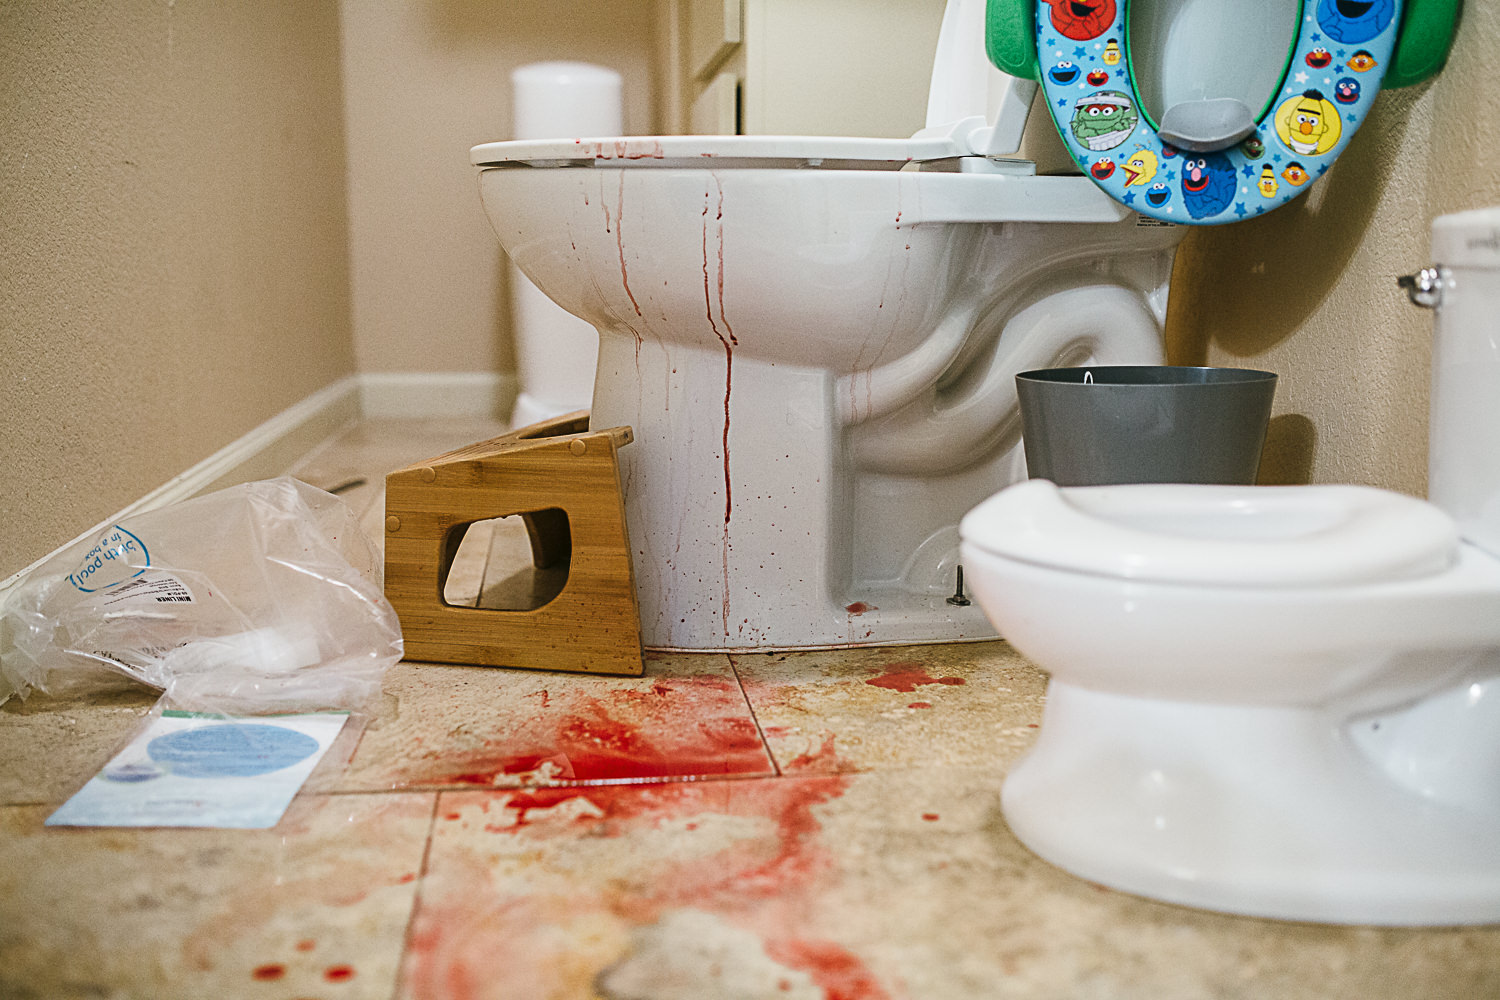 blood on the floor and toilet after an unassisted birth